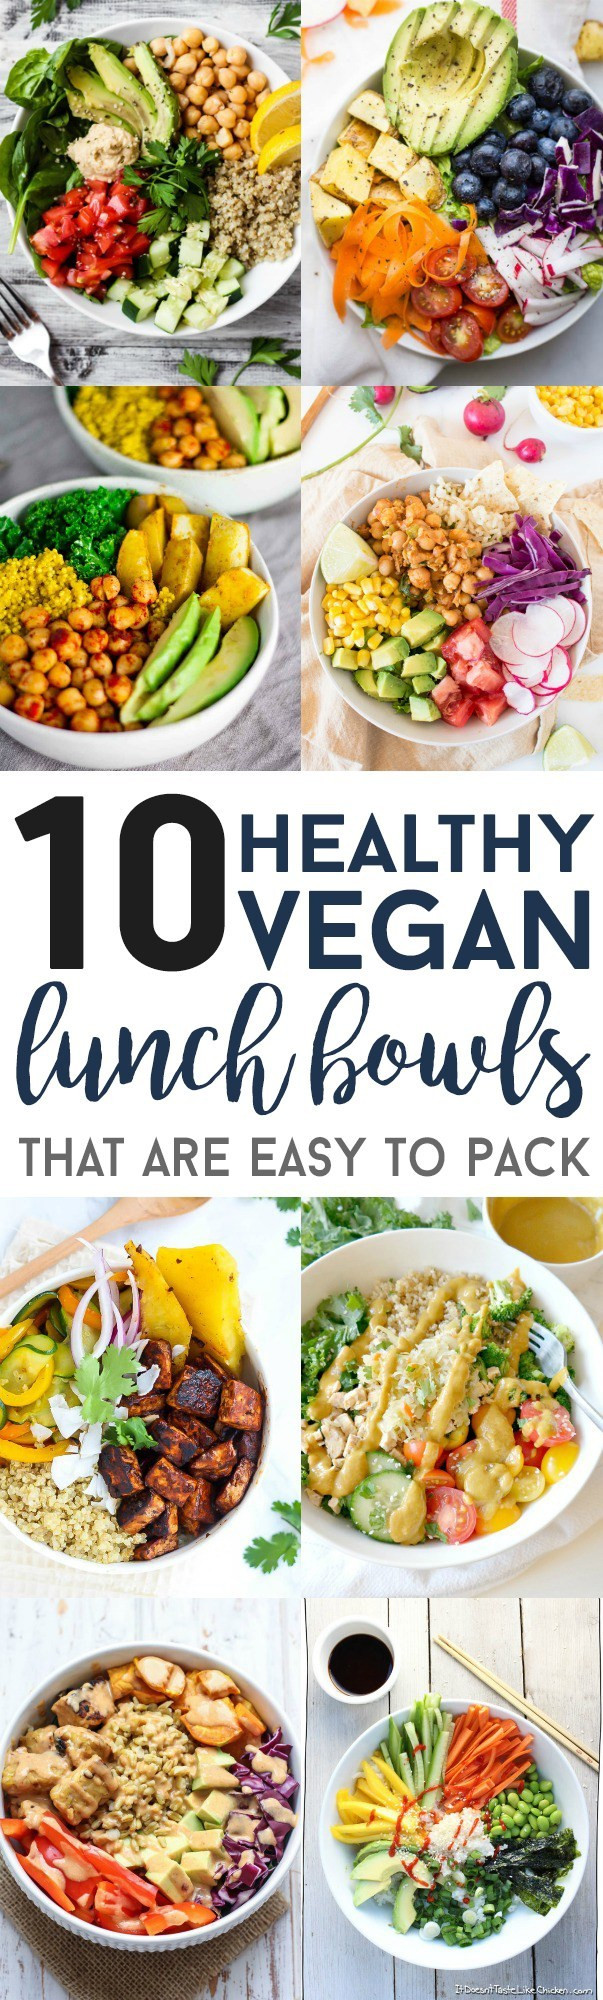 Healthy Vegan Lunches
 10 Vegan Lunch Bowls that are Easy to Pack